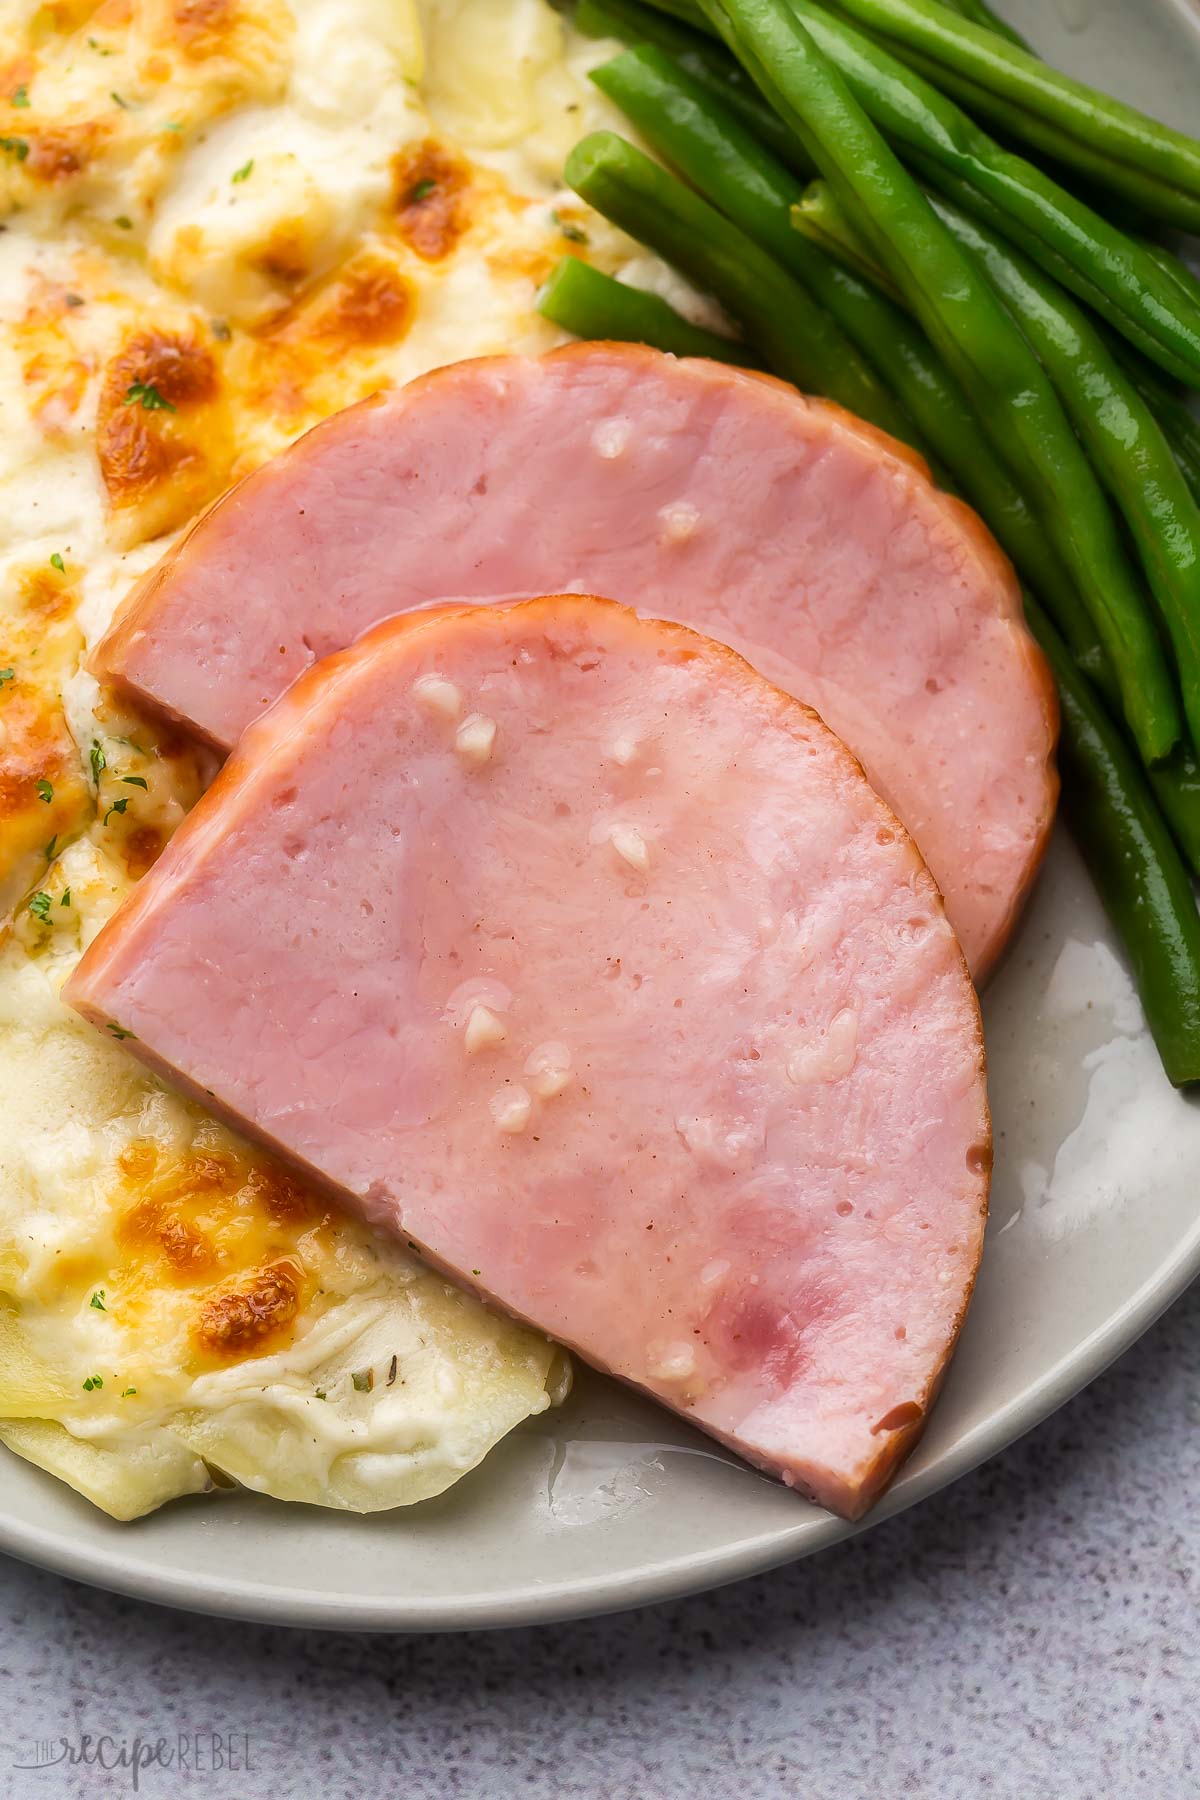 two slices of honey glazed ham on a plate with potatoes and green beans.